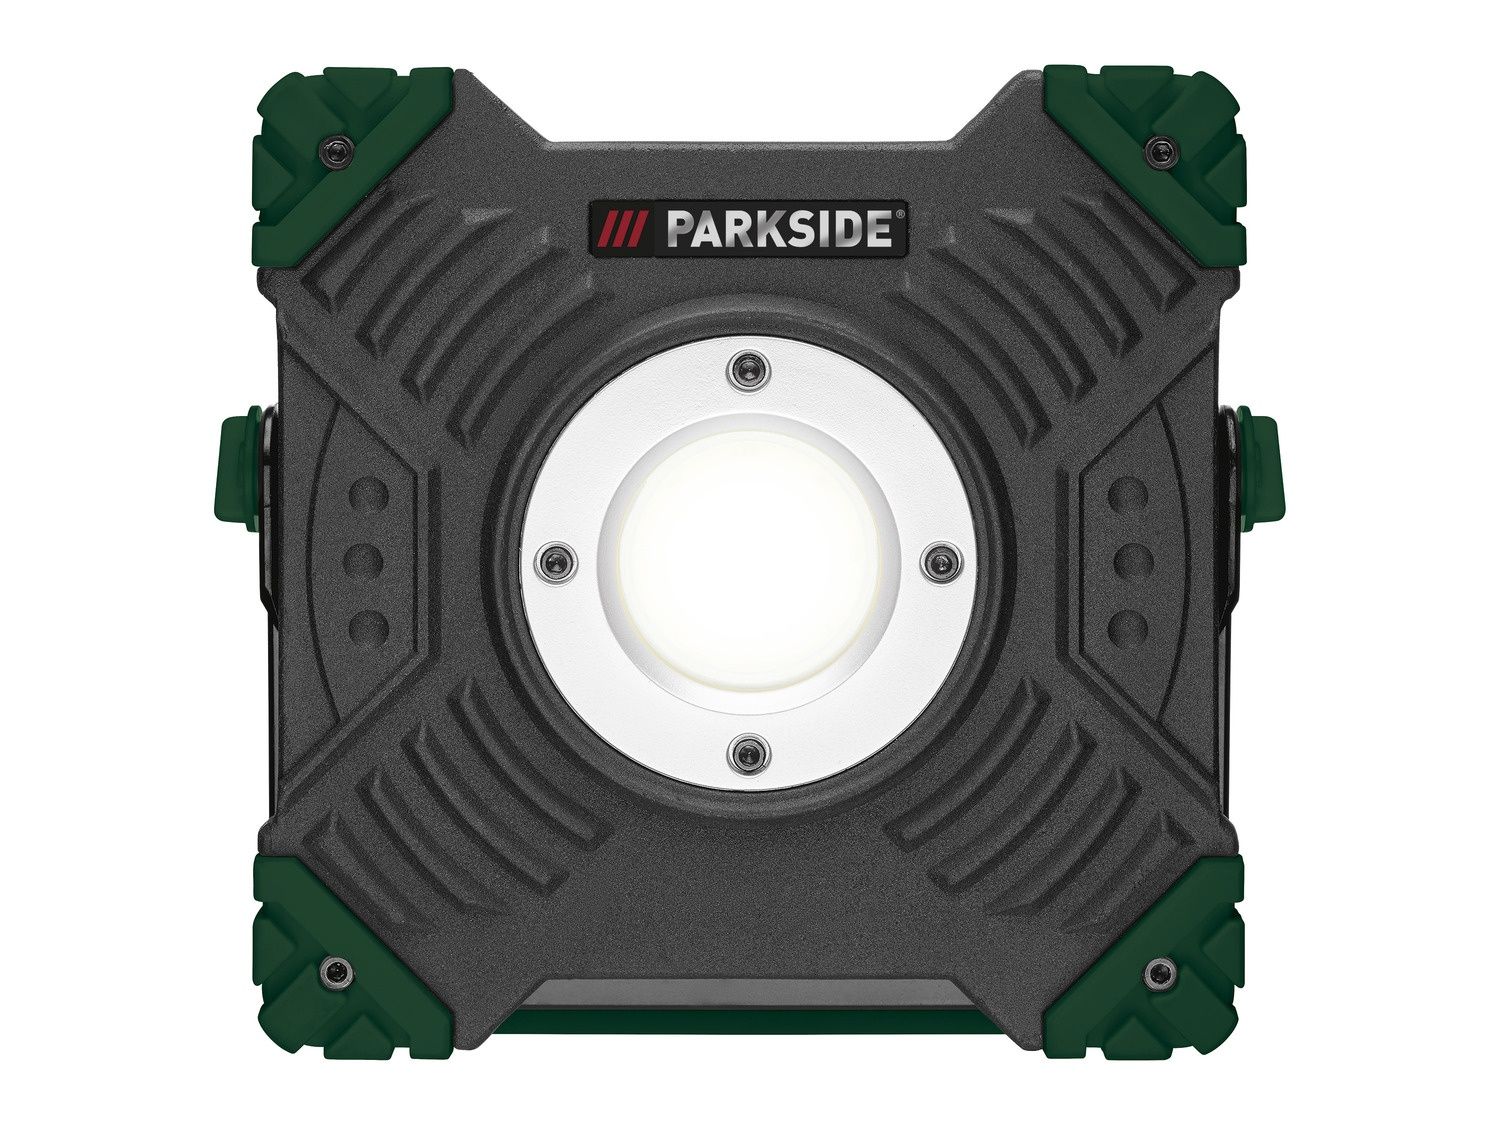 Proiector led puternic 20w !! parkside PAAL 6000 C3